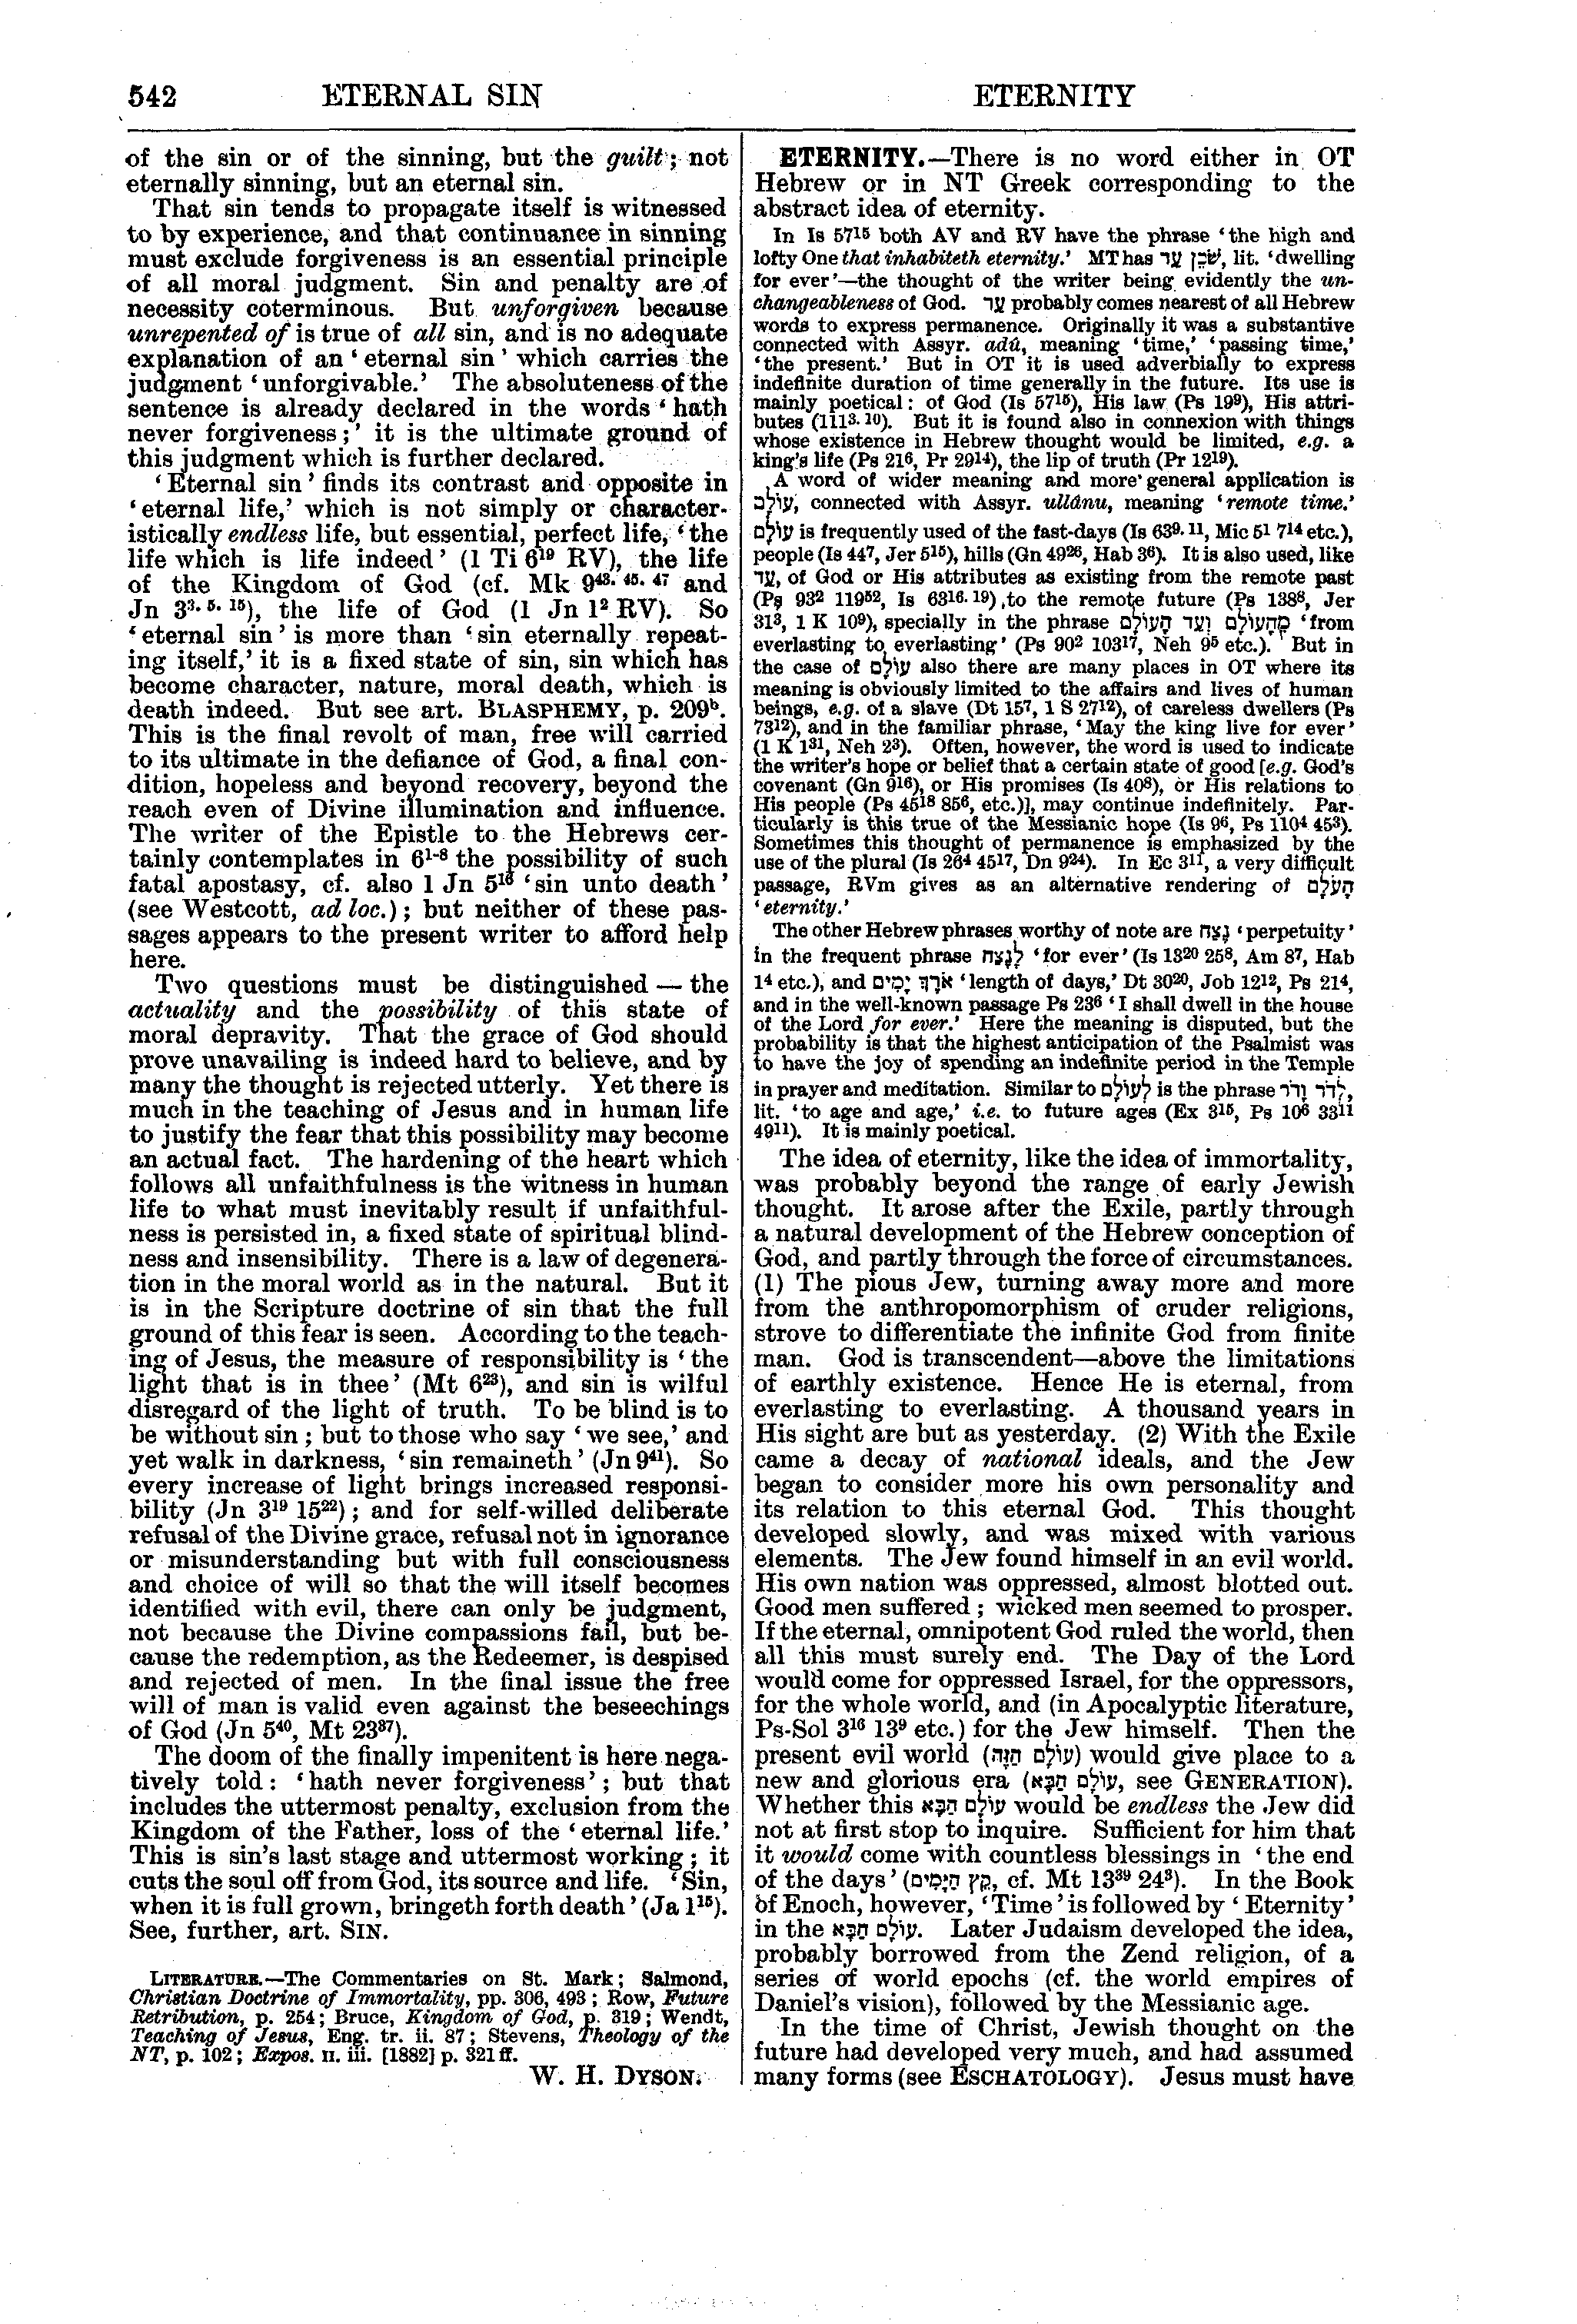 Image of page 542